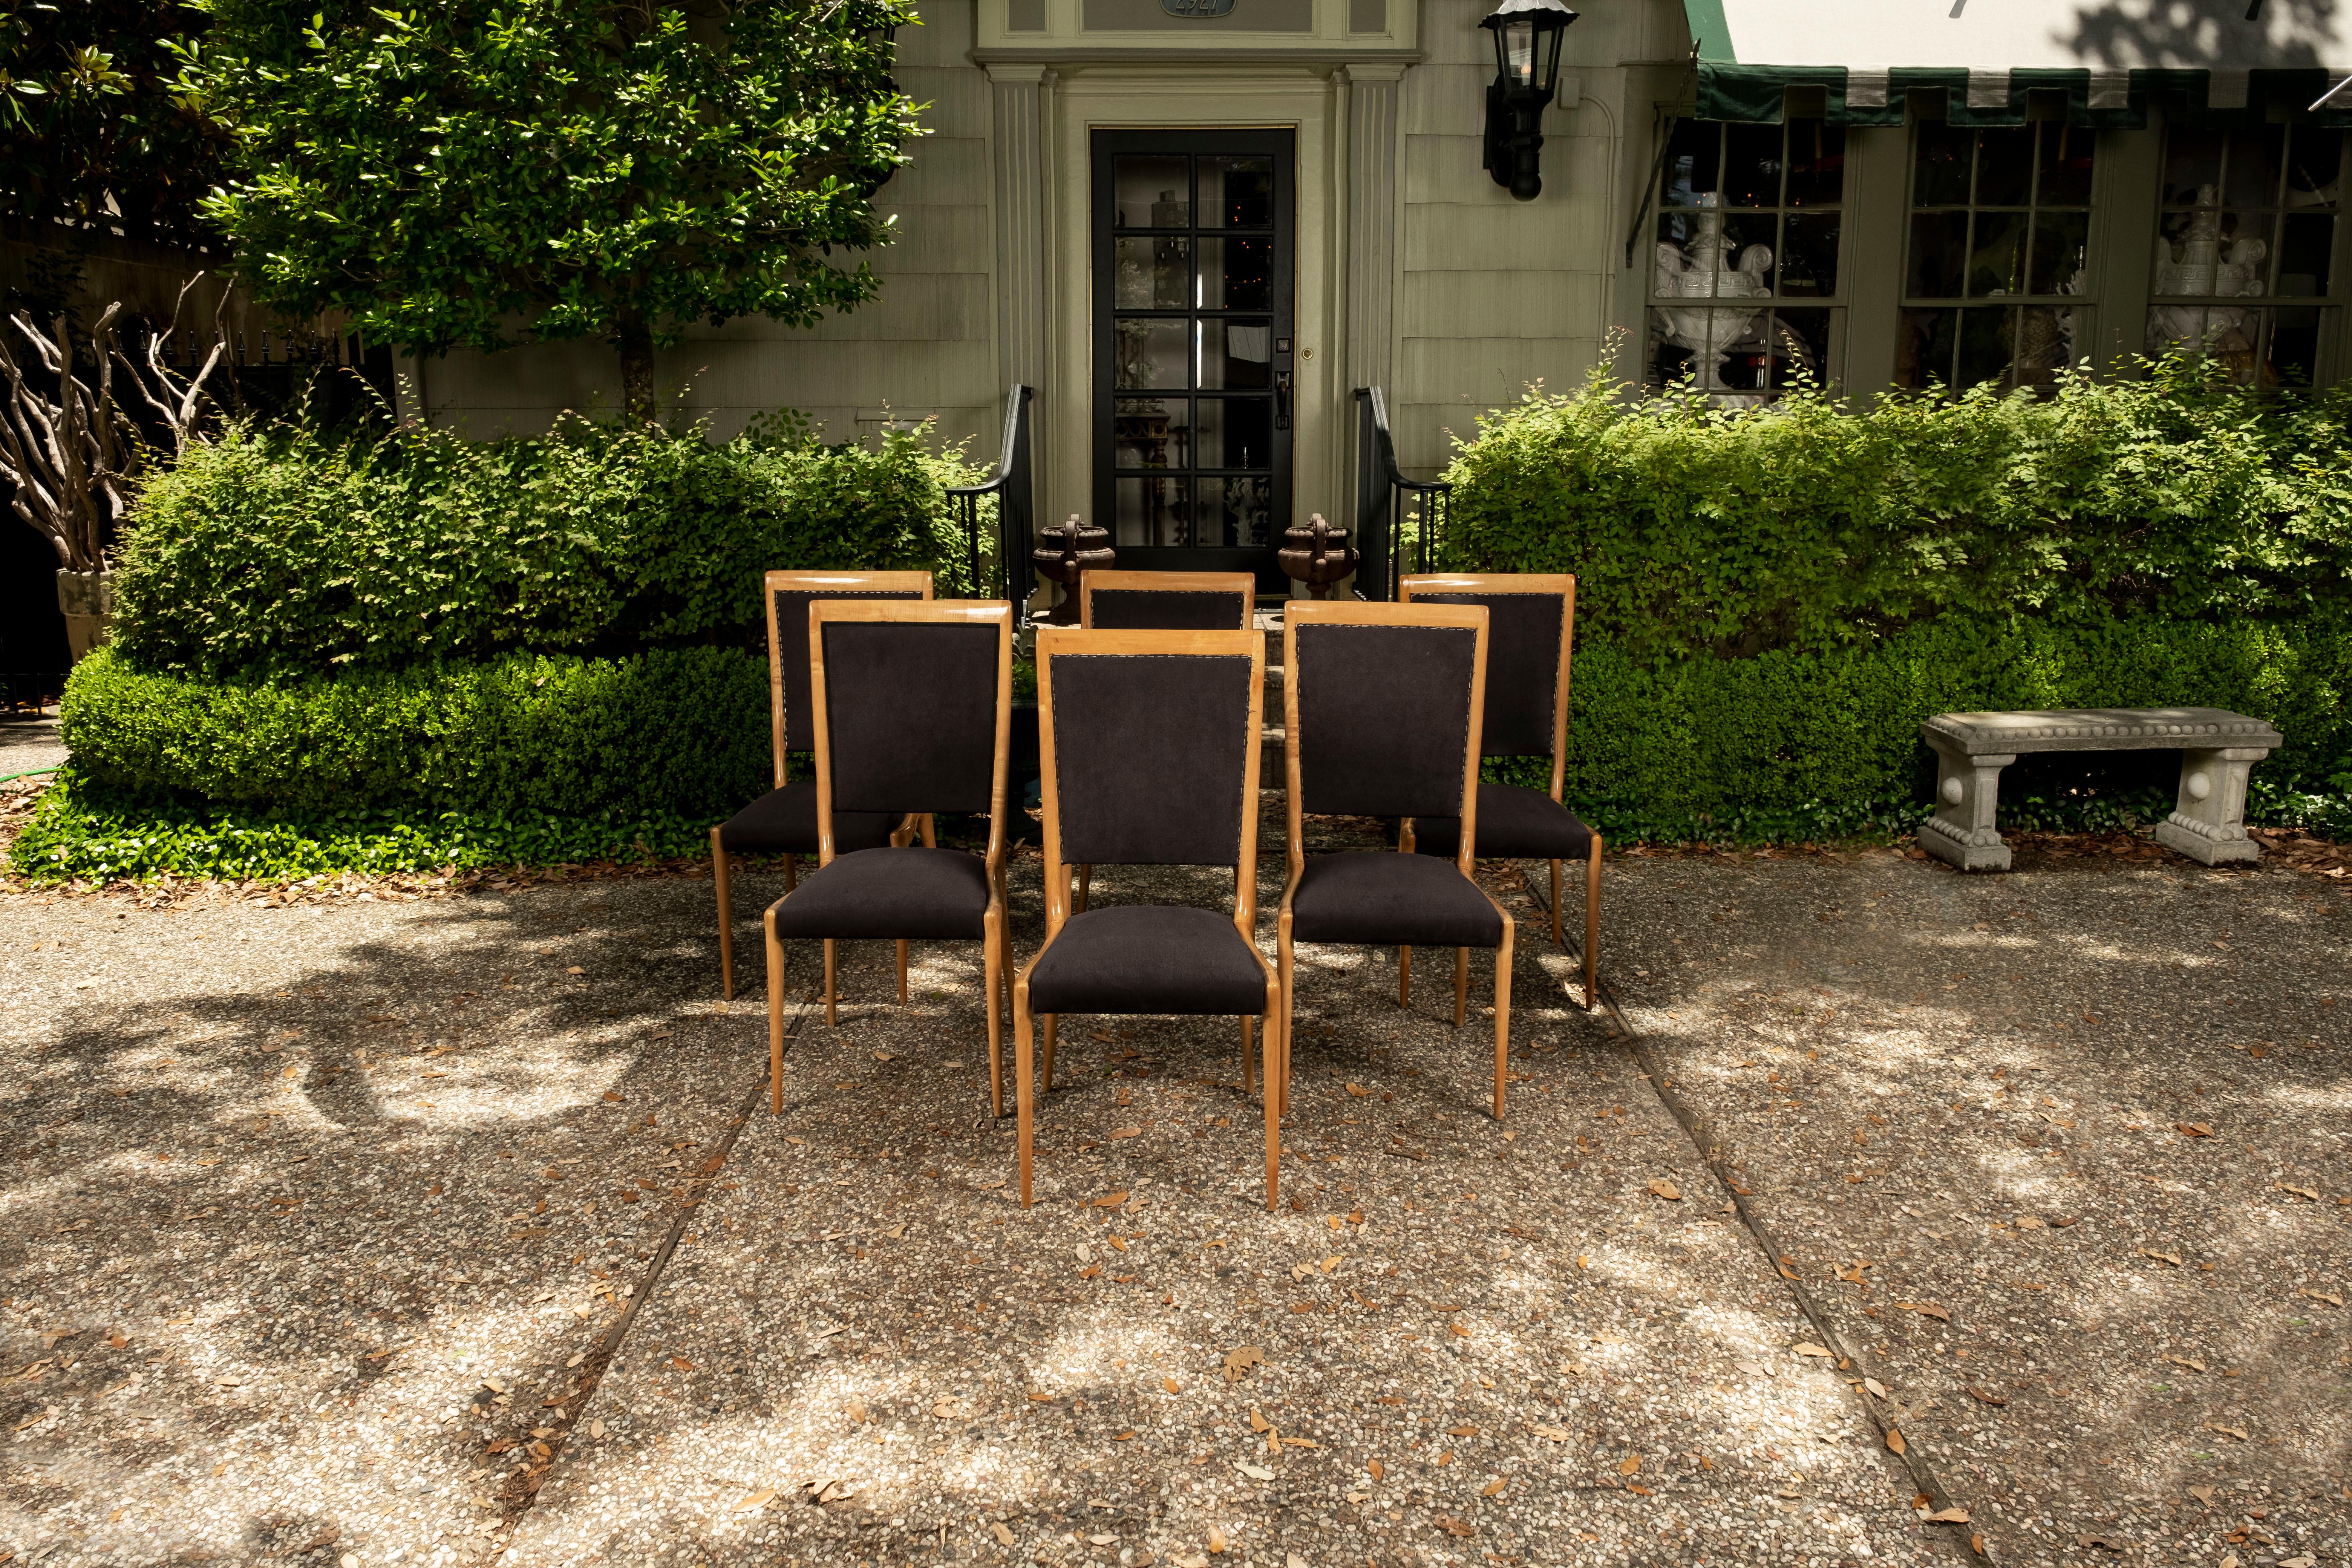 Italian Mid Century dining chairs After Gio Ponti.
Set of six Italian mid-century fruitwood dining chairs after Gio Ponti. These exceptional Italian modern dining chairs are generous in size and extremely comfortable.
This chic set of Italian